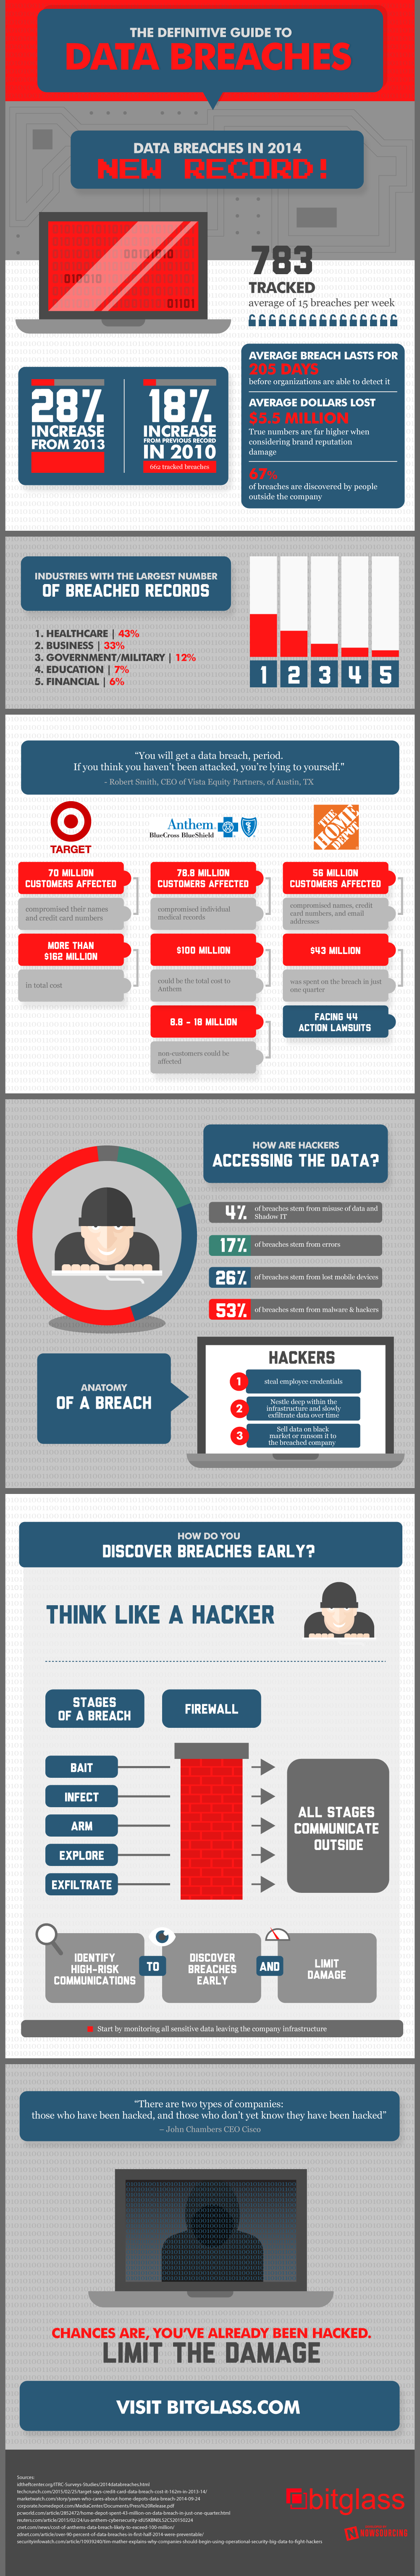 The Definitive Guide To Data Breaches